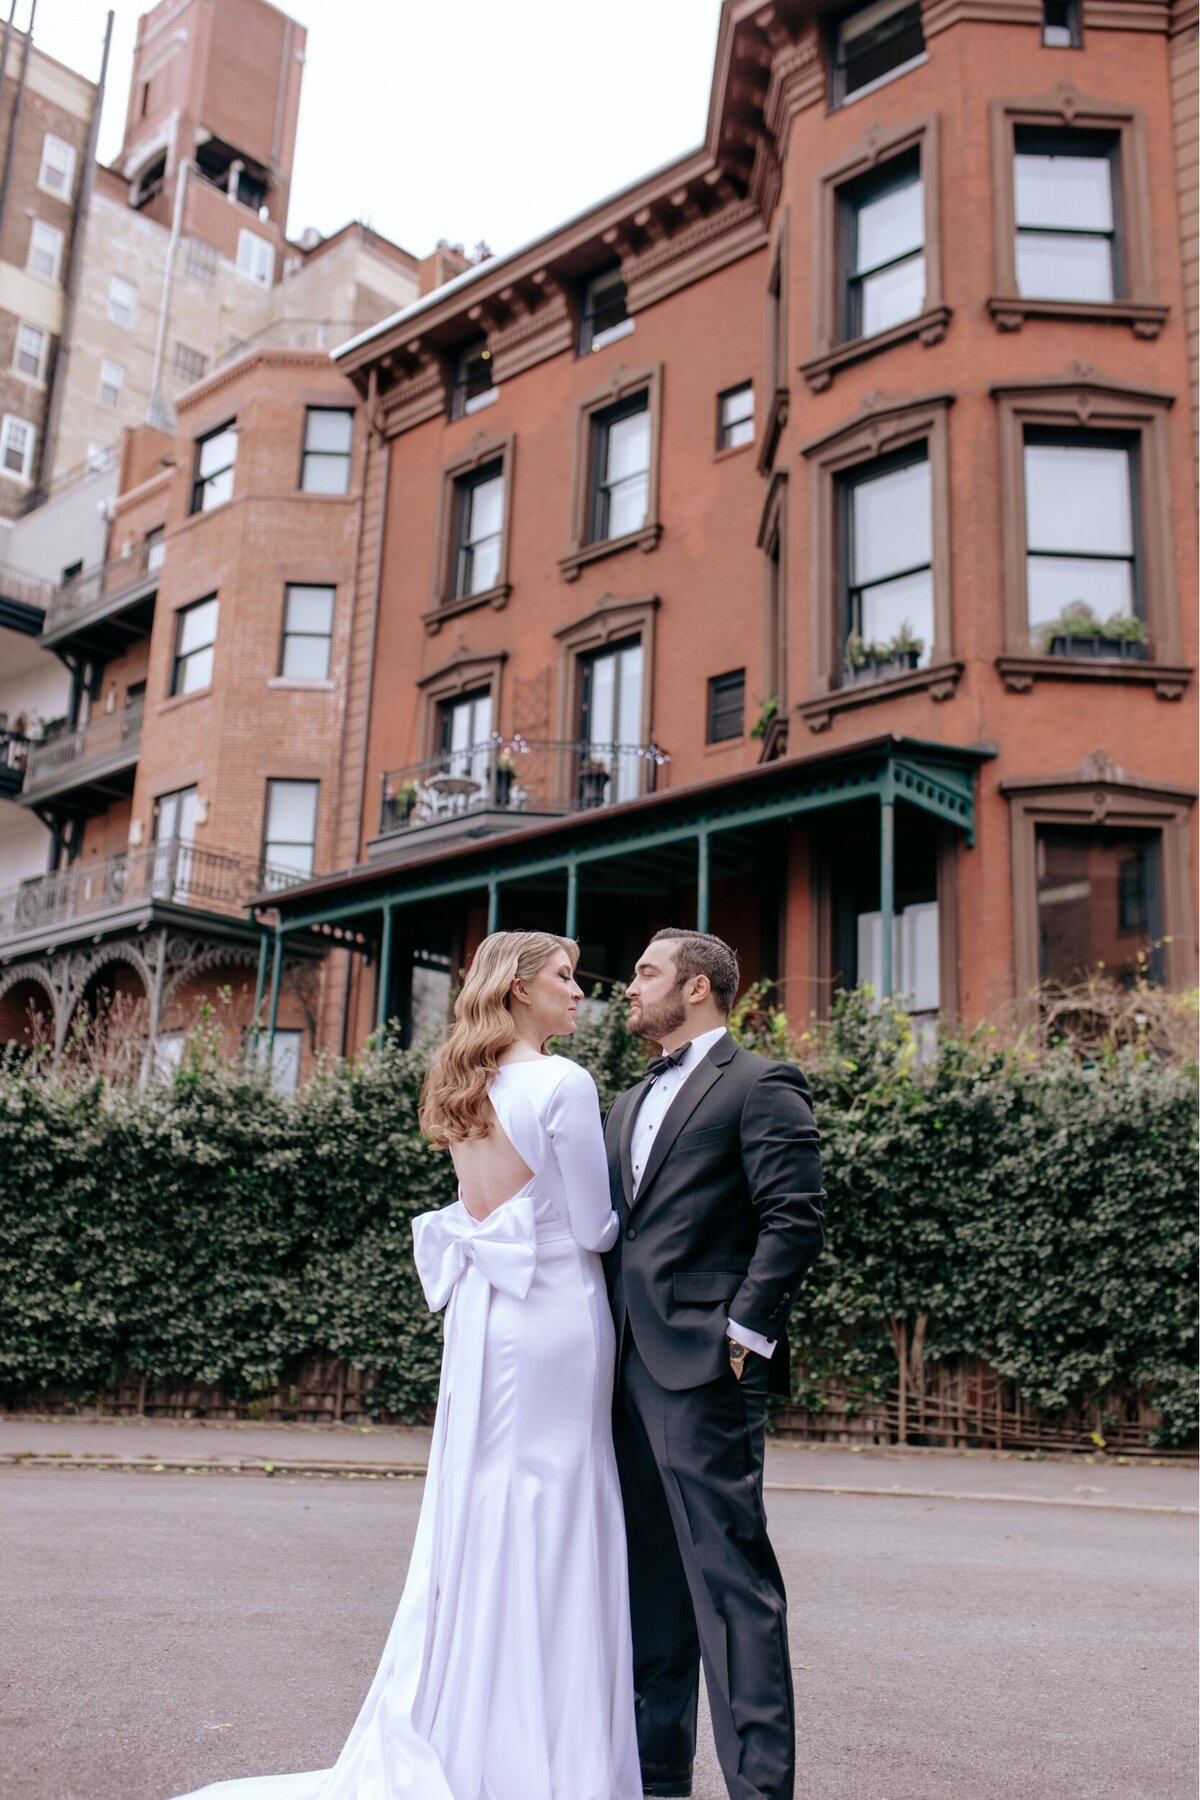 Bride and groom gazing at one another in in fron of a townhouse in NYC.